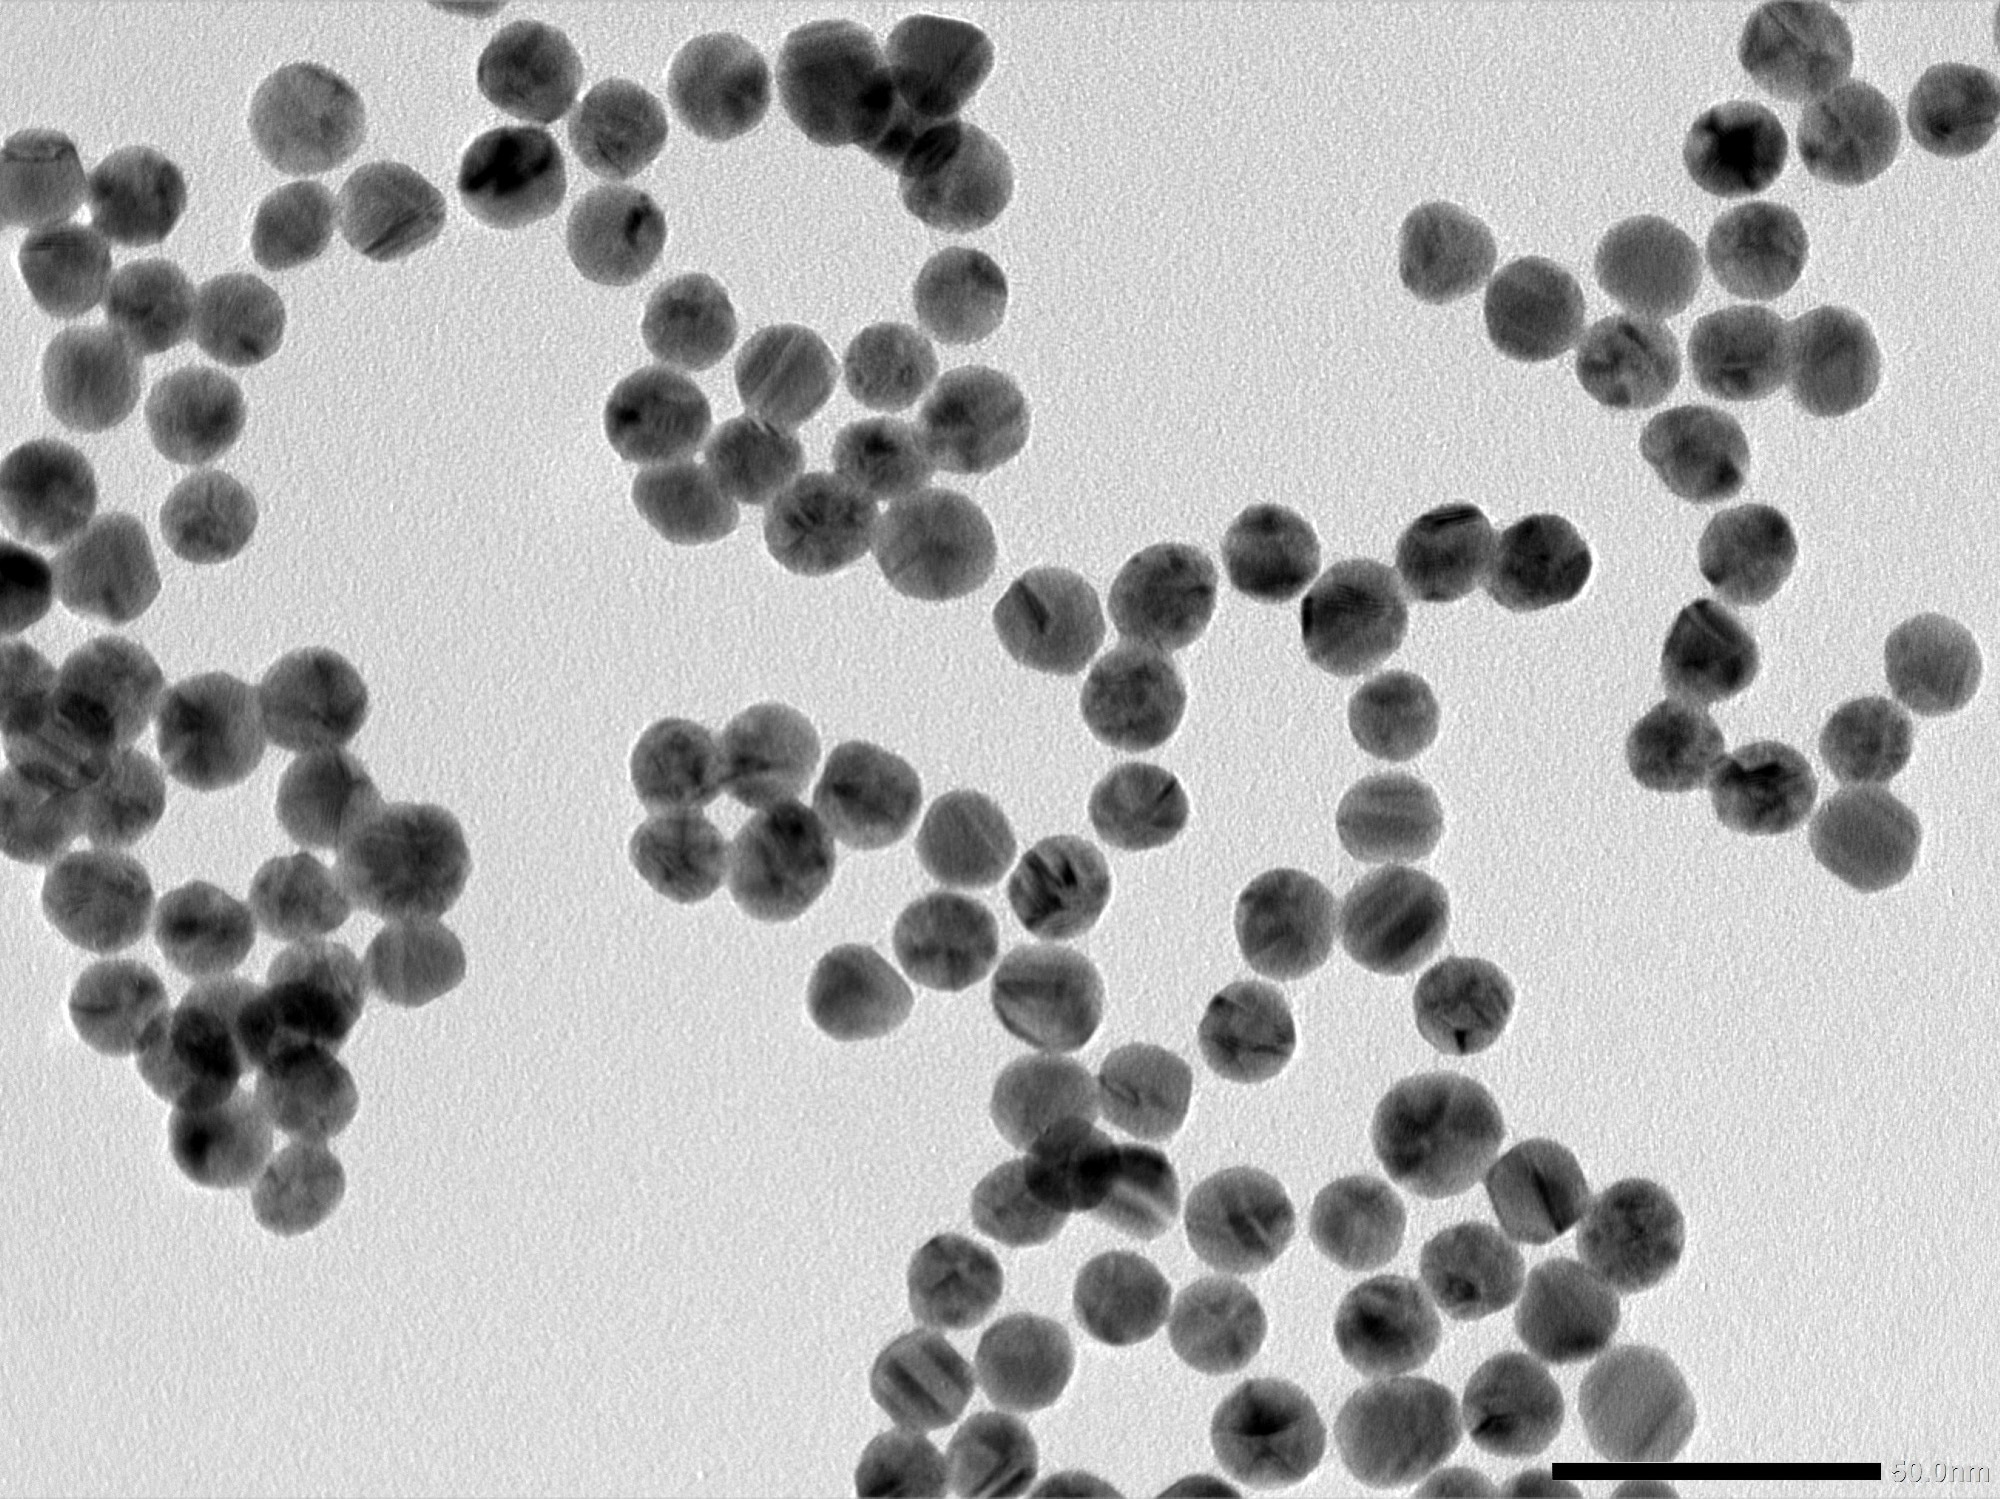 Study: Nanoparticles and Other Nanostructures and the Control of Pathogens: From Bench to Vaccines. Image Credit: nararat yong / Shutterstock.com